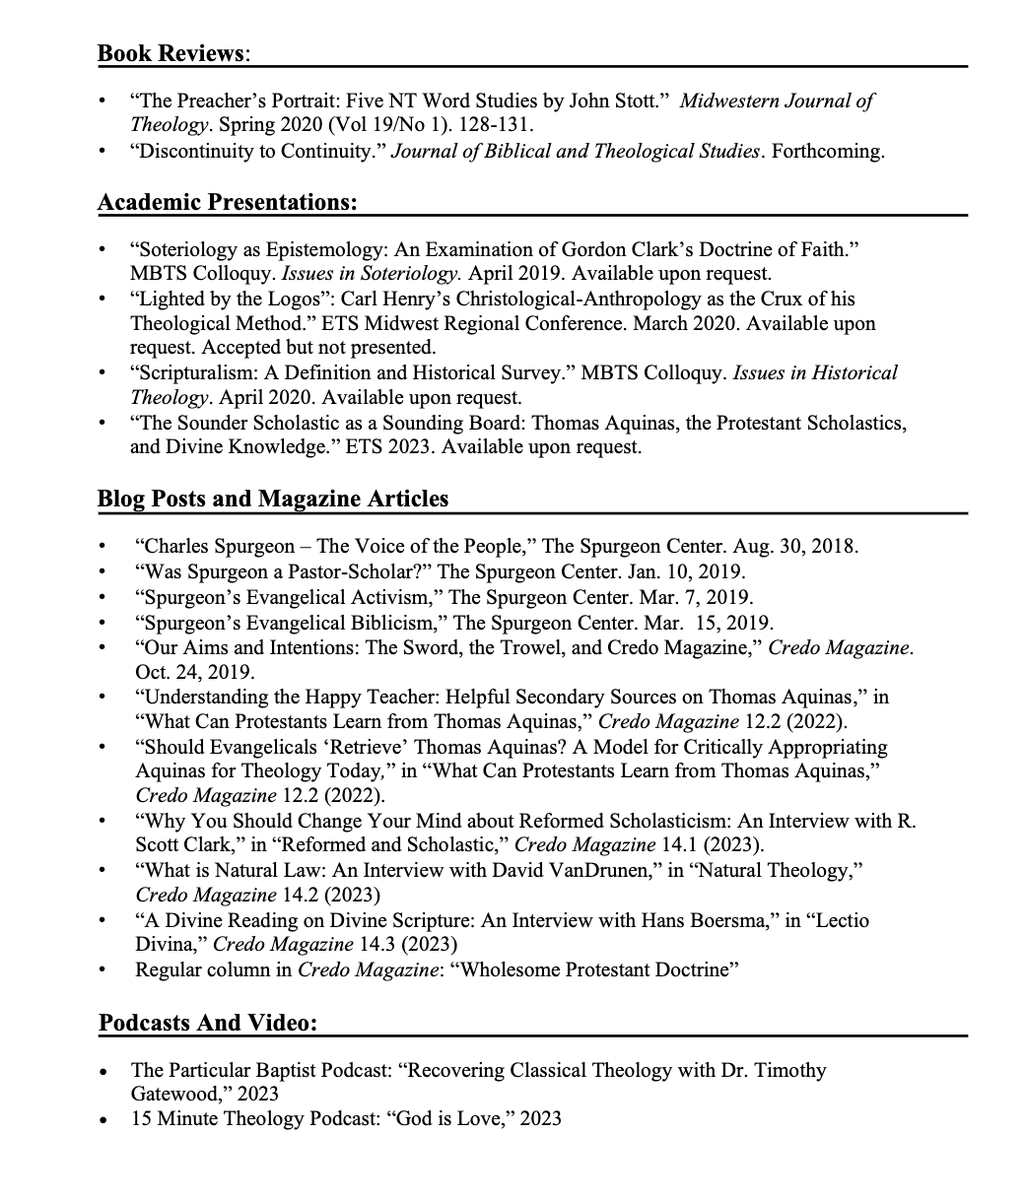 Like many folks, I am looking for a full-time teaching position. If any of my followers know of any opportunities, I will listen to any and all leads. I've included a snippet of my CV below, but I'll be happy to send more information if anyone wants it.